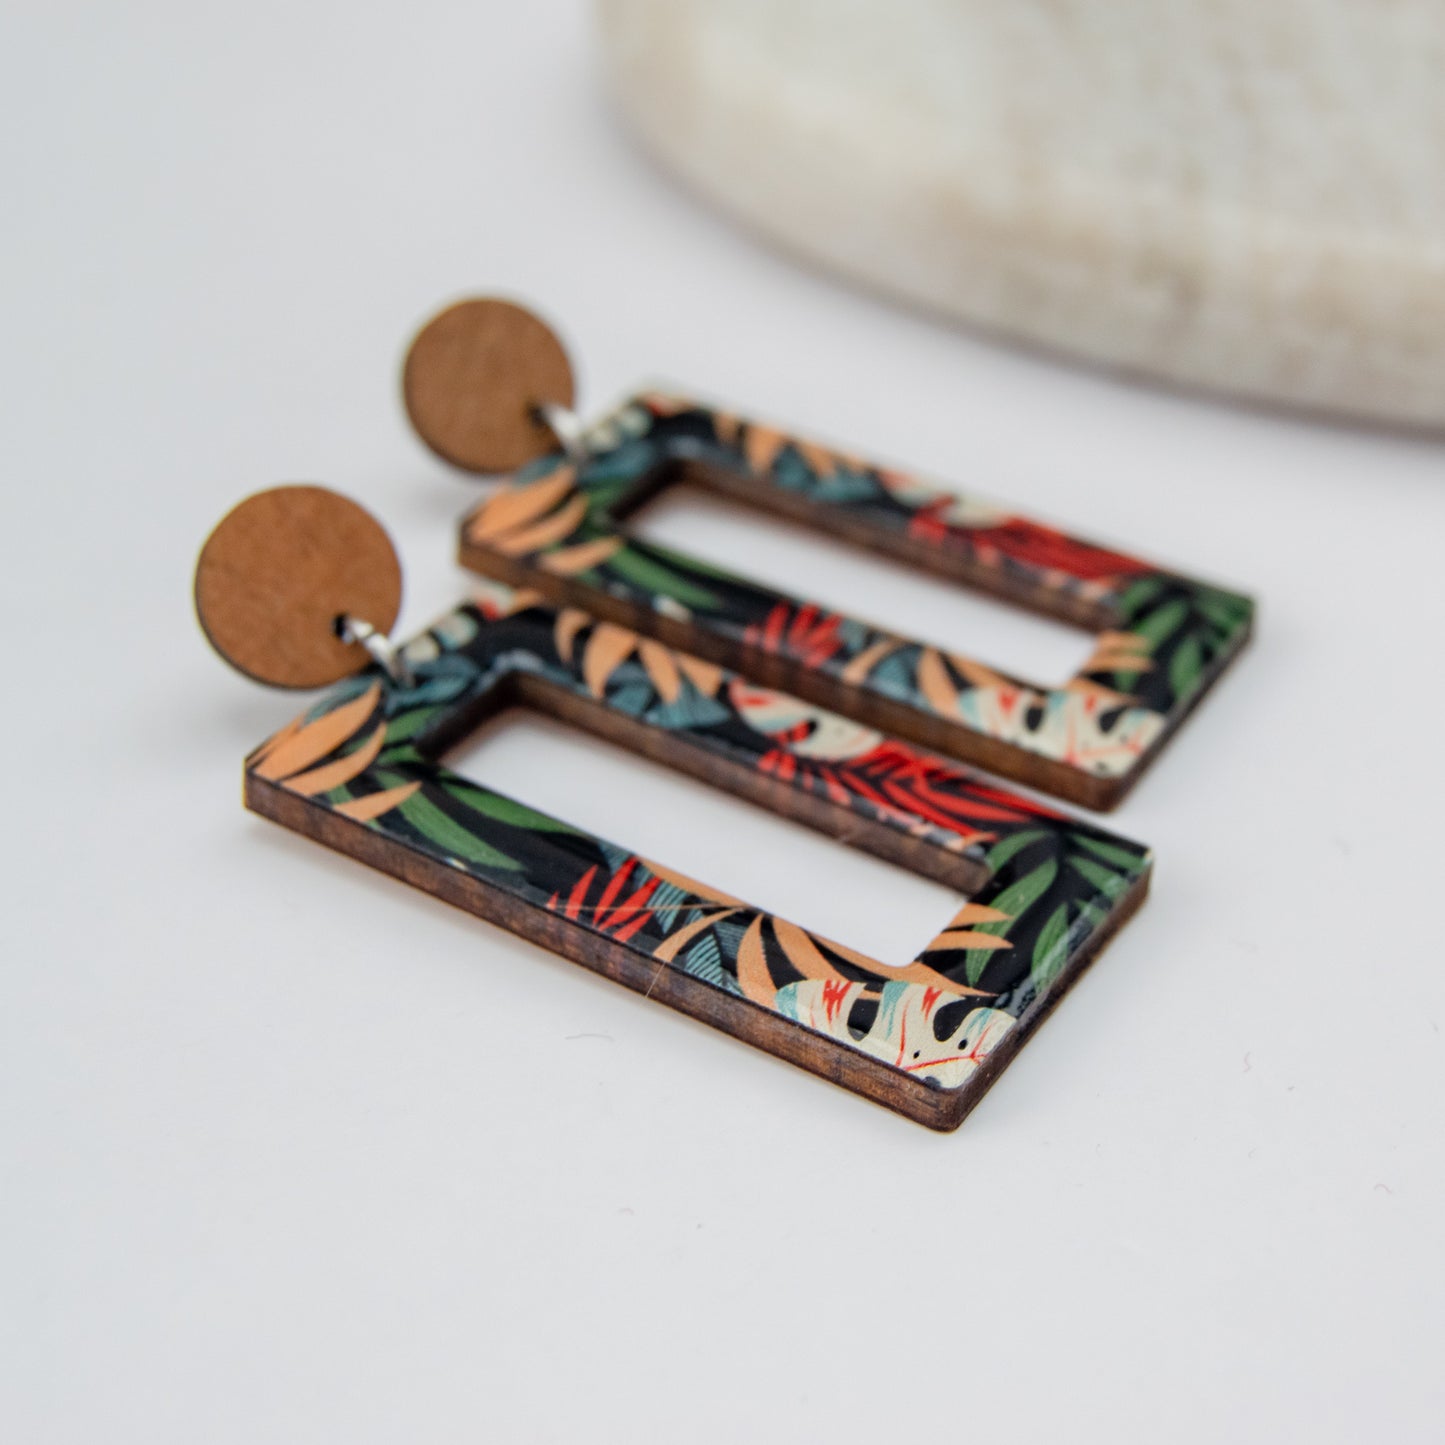 Emma - Wooden statement earrings with beautiful print of tropical leaves